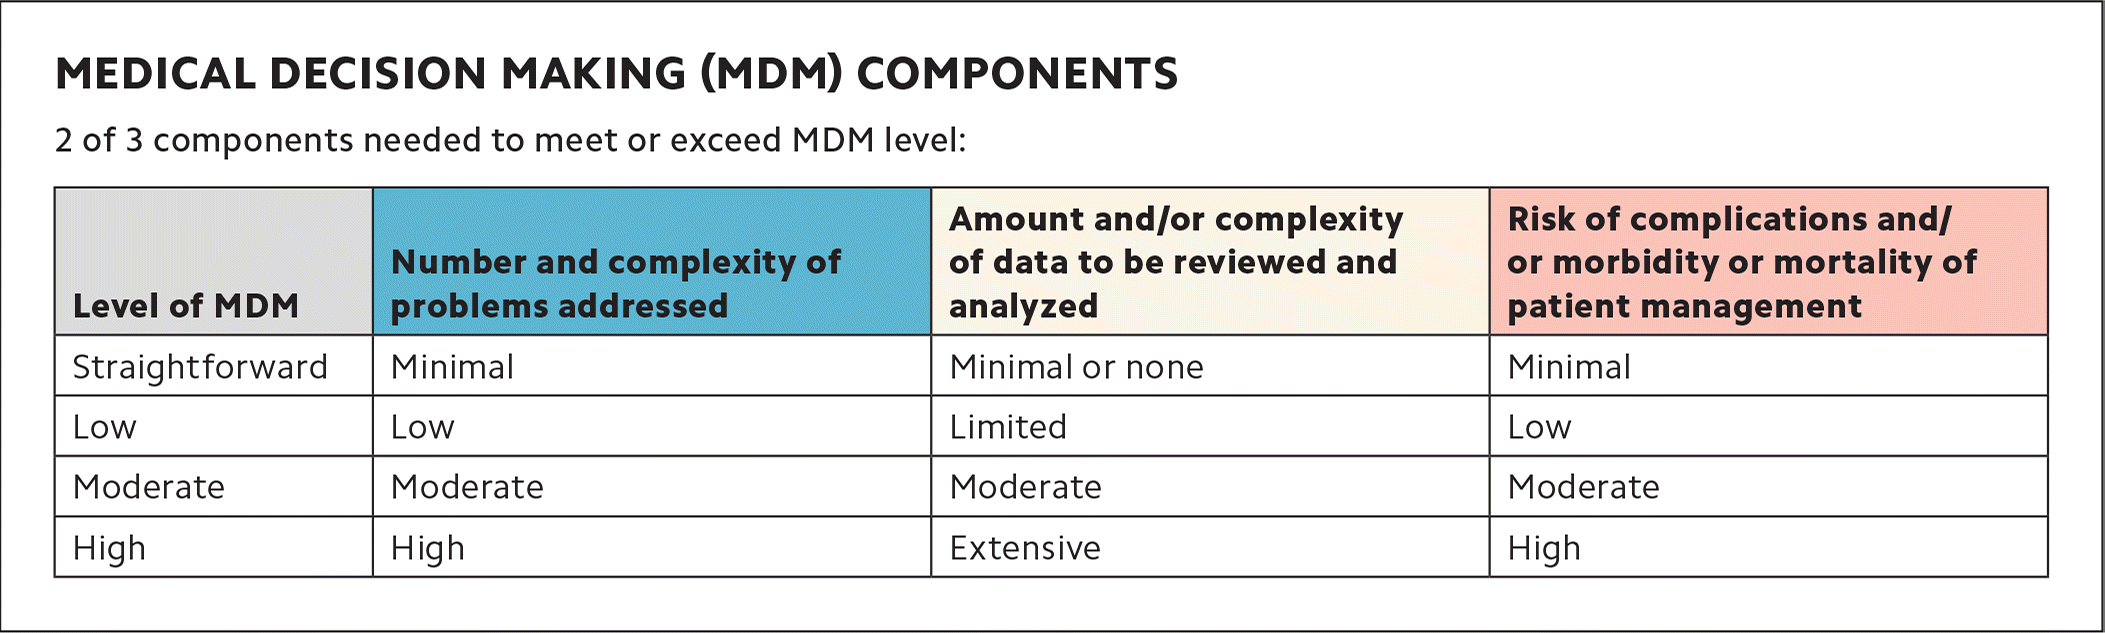 Level of MDM Number and complexity of problems addressed Amount and/or